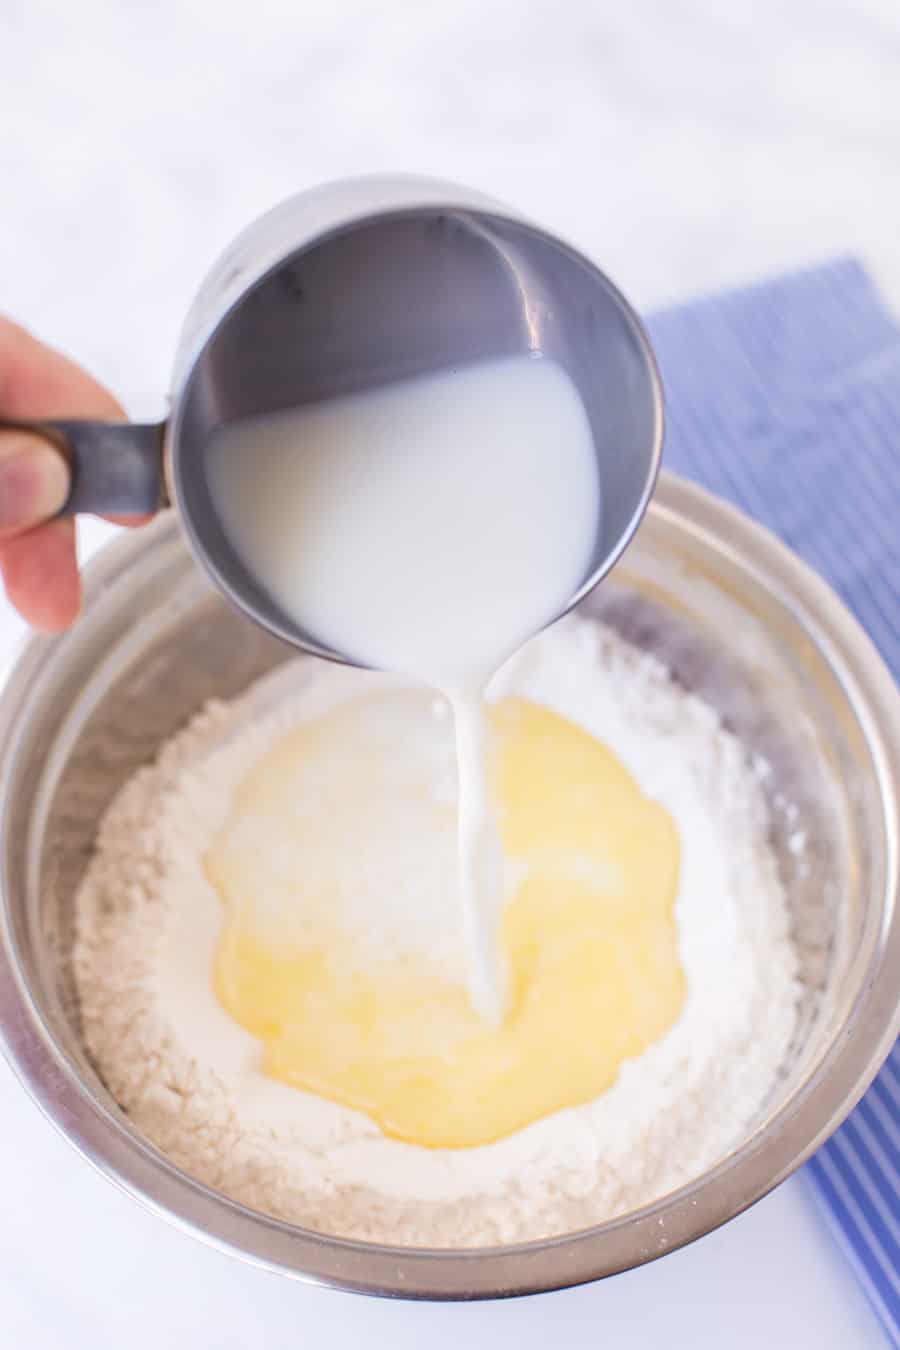 milk over flour in a mixing bowl for dumplings